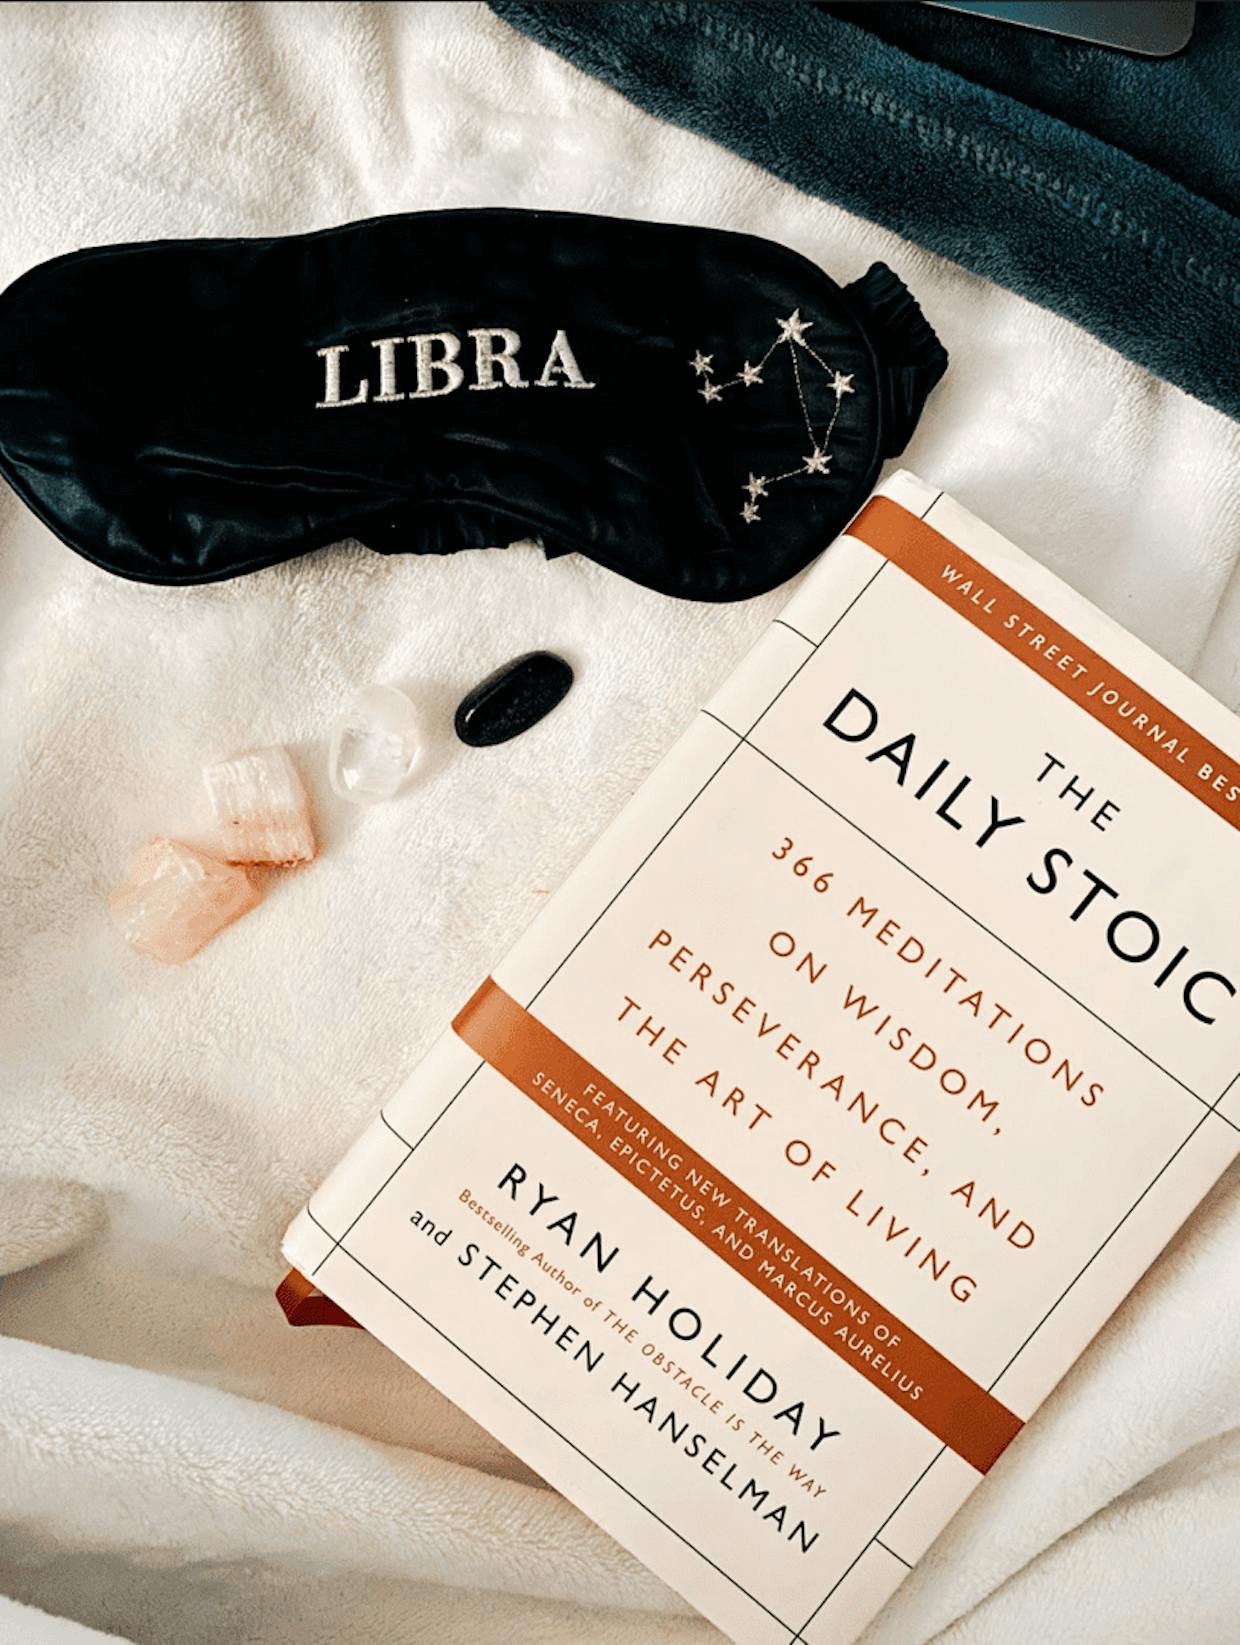 Morning essentials: remove eye mask, read the Daily Stoic, receive good energy from my crystals